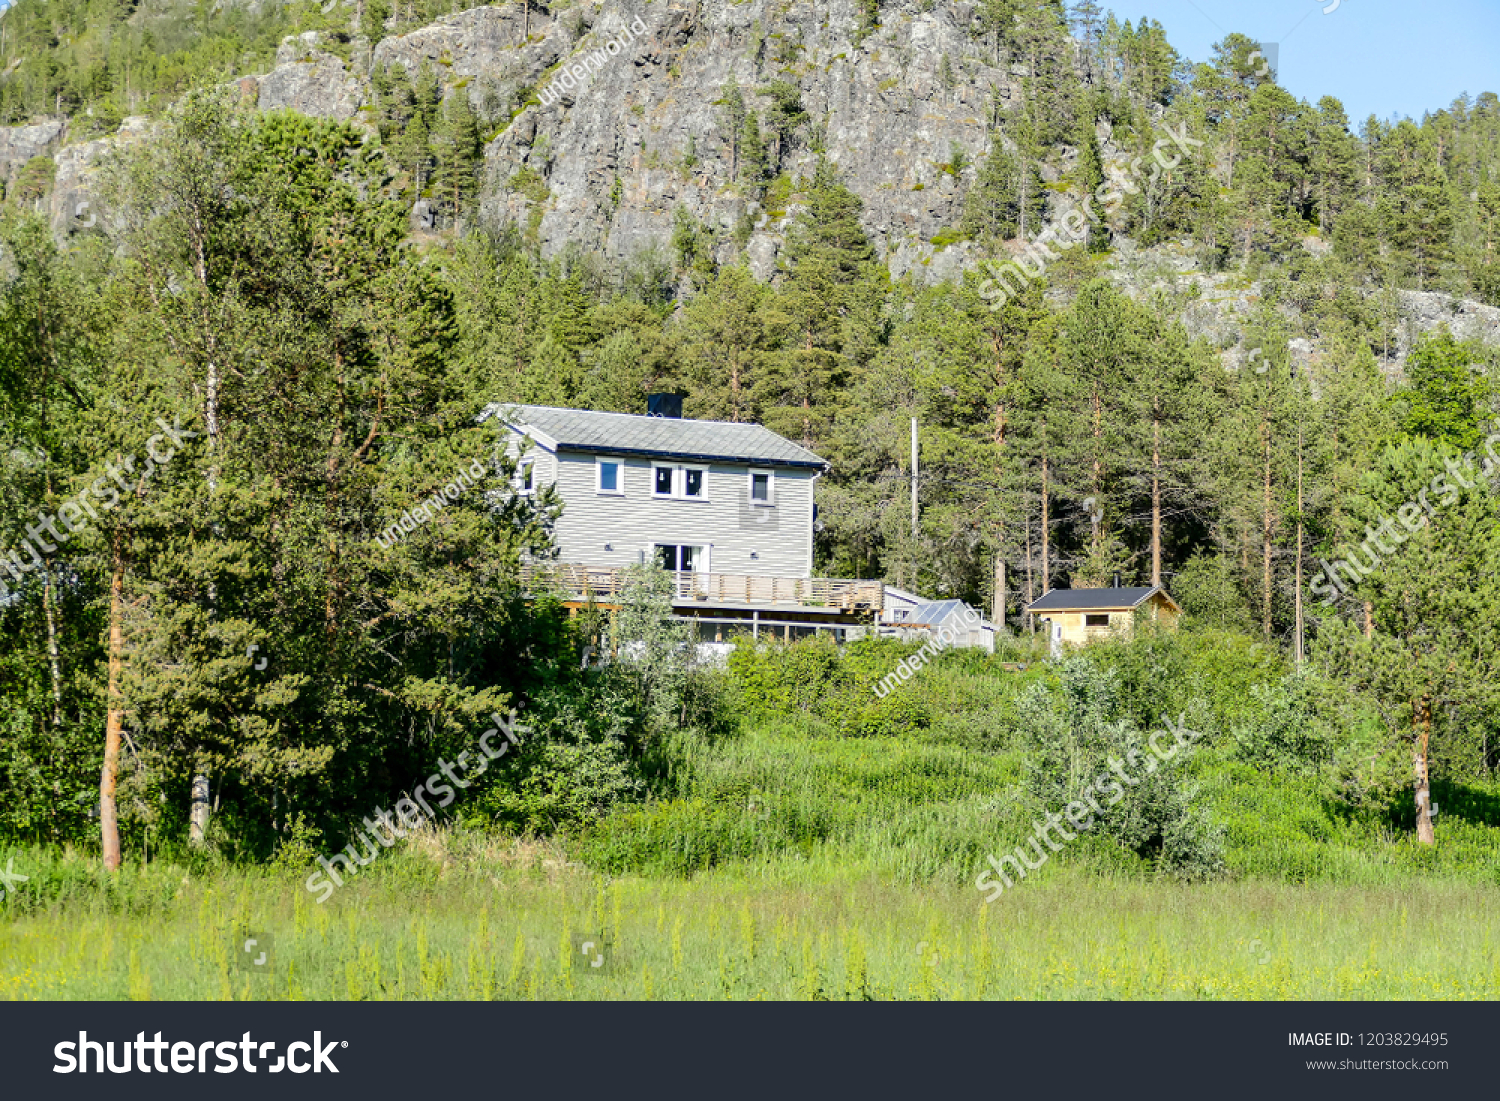 house in the forest, in Sweden Scandinavia North Europe #1203829495